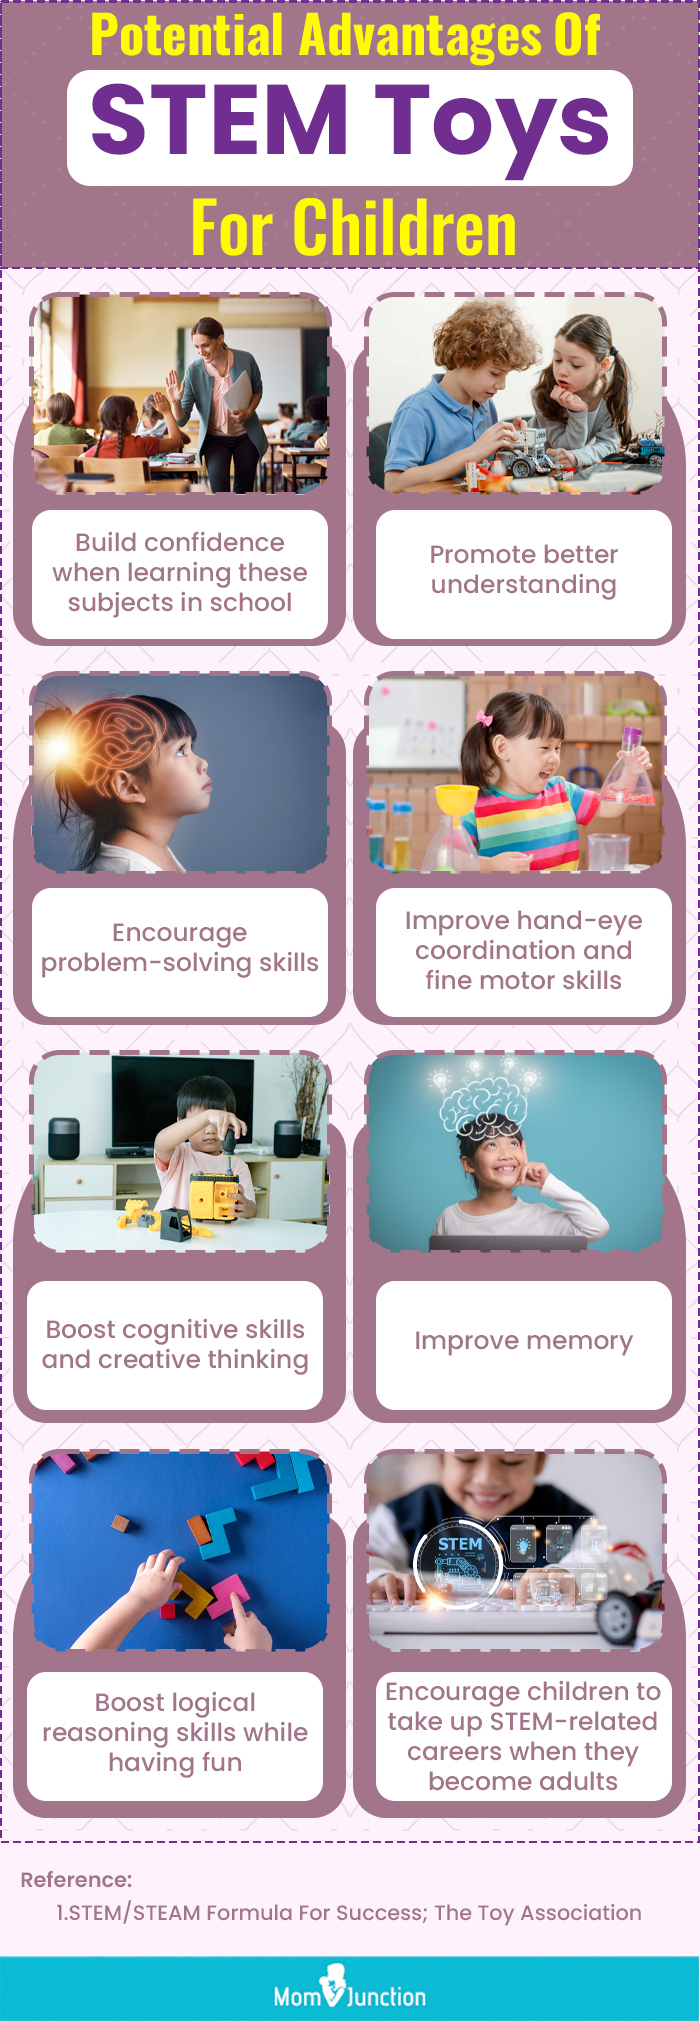 Potential Advantages Of STEM Toys For Children (infographic)